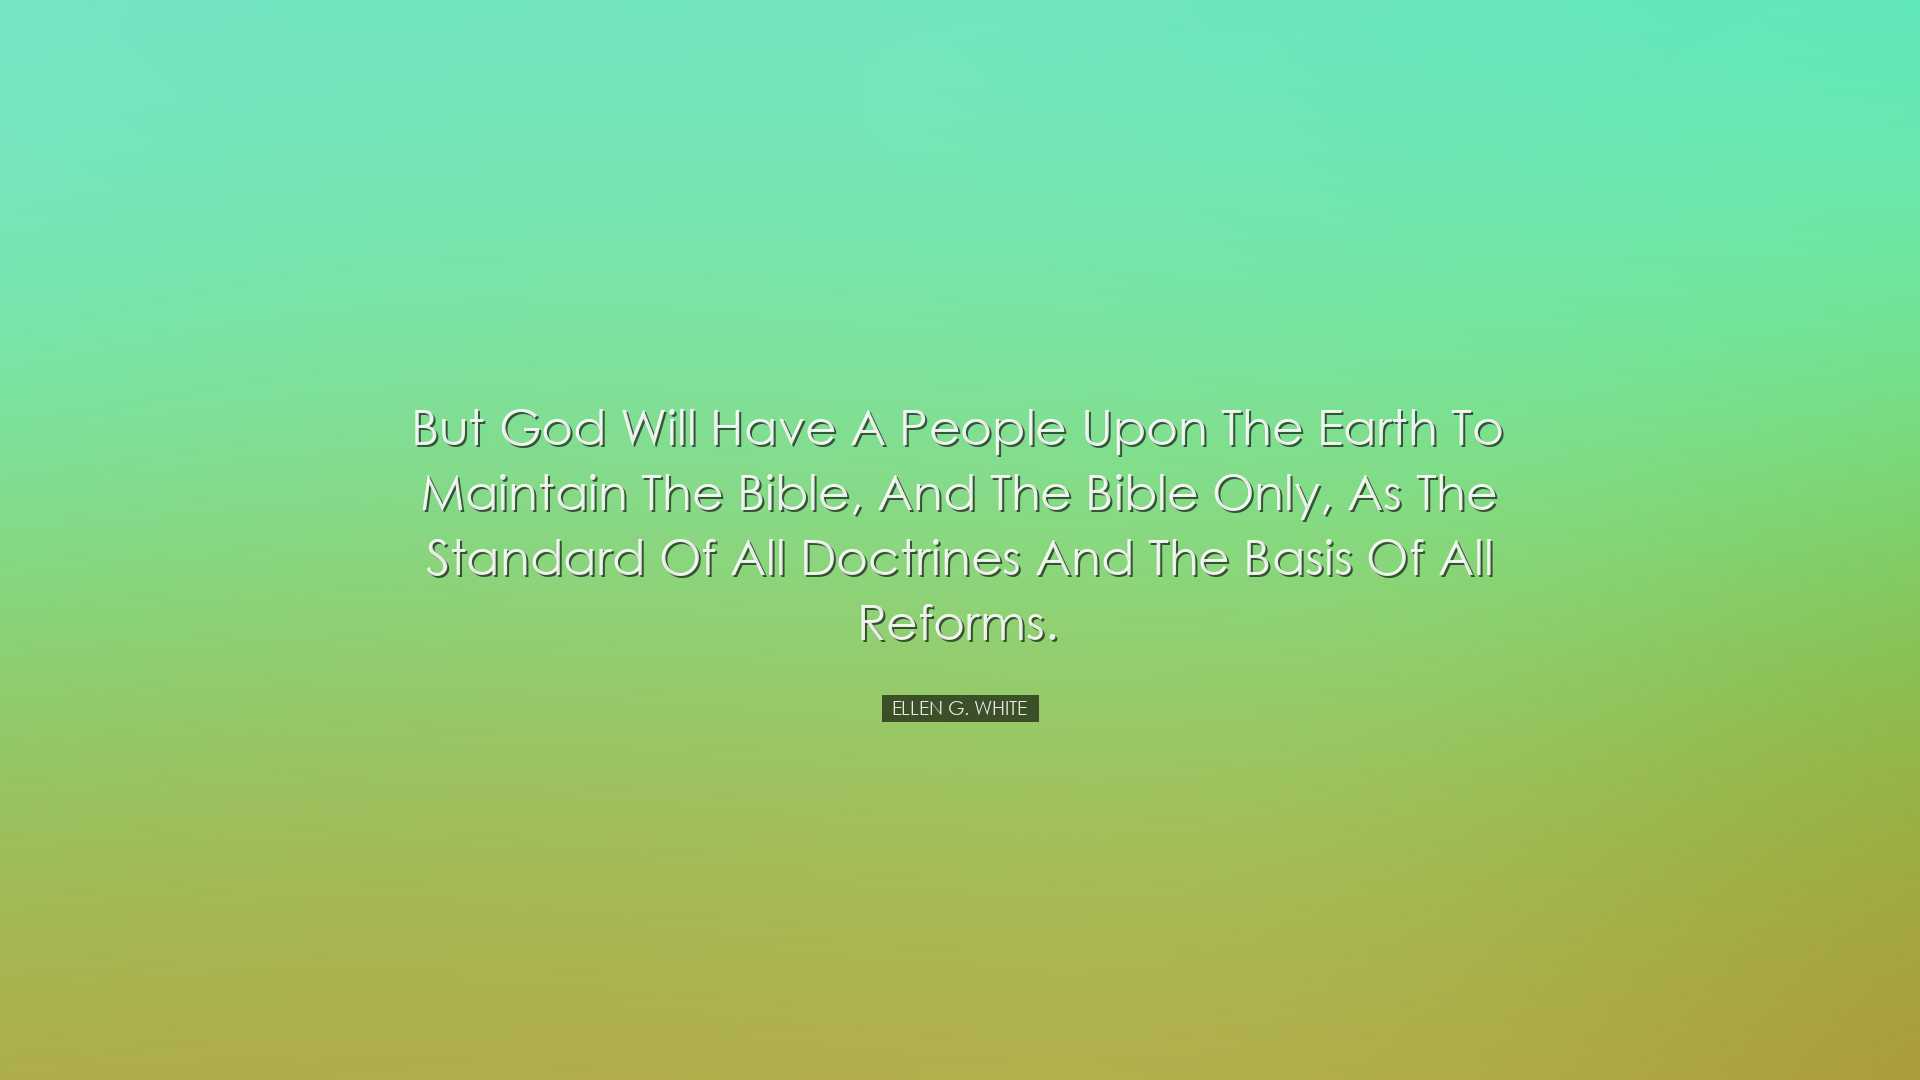 But God will have a people upon the earth to maintain the Bible, a